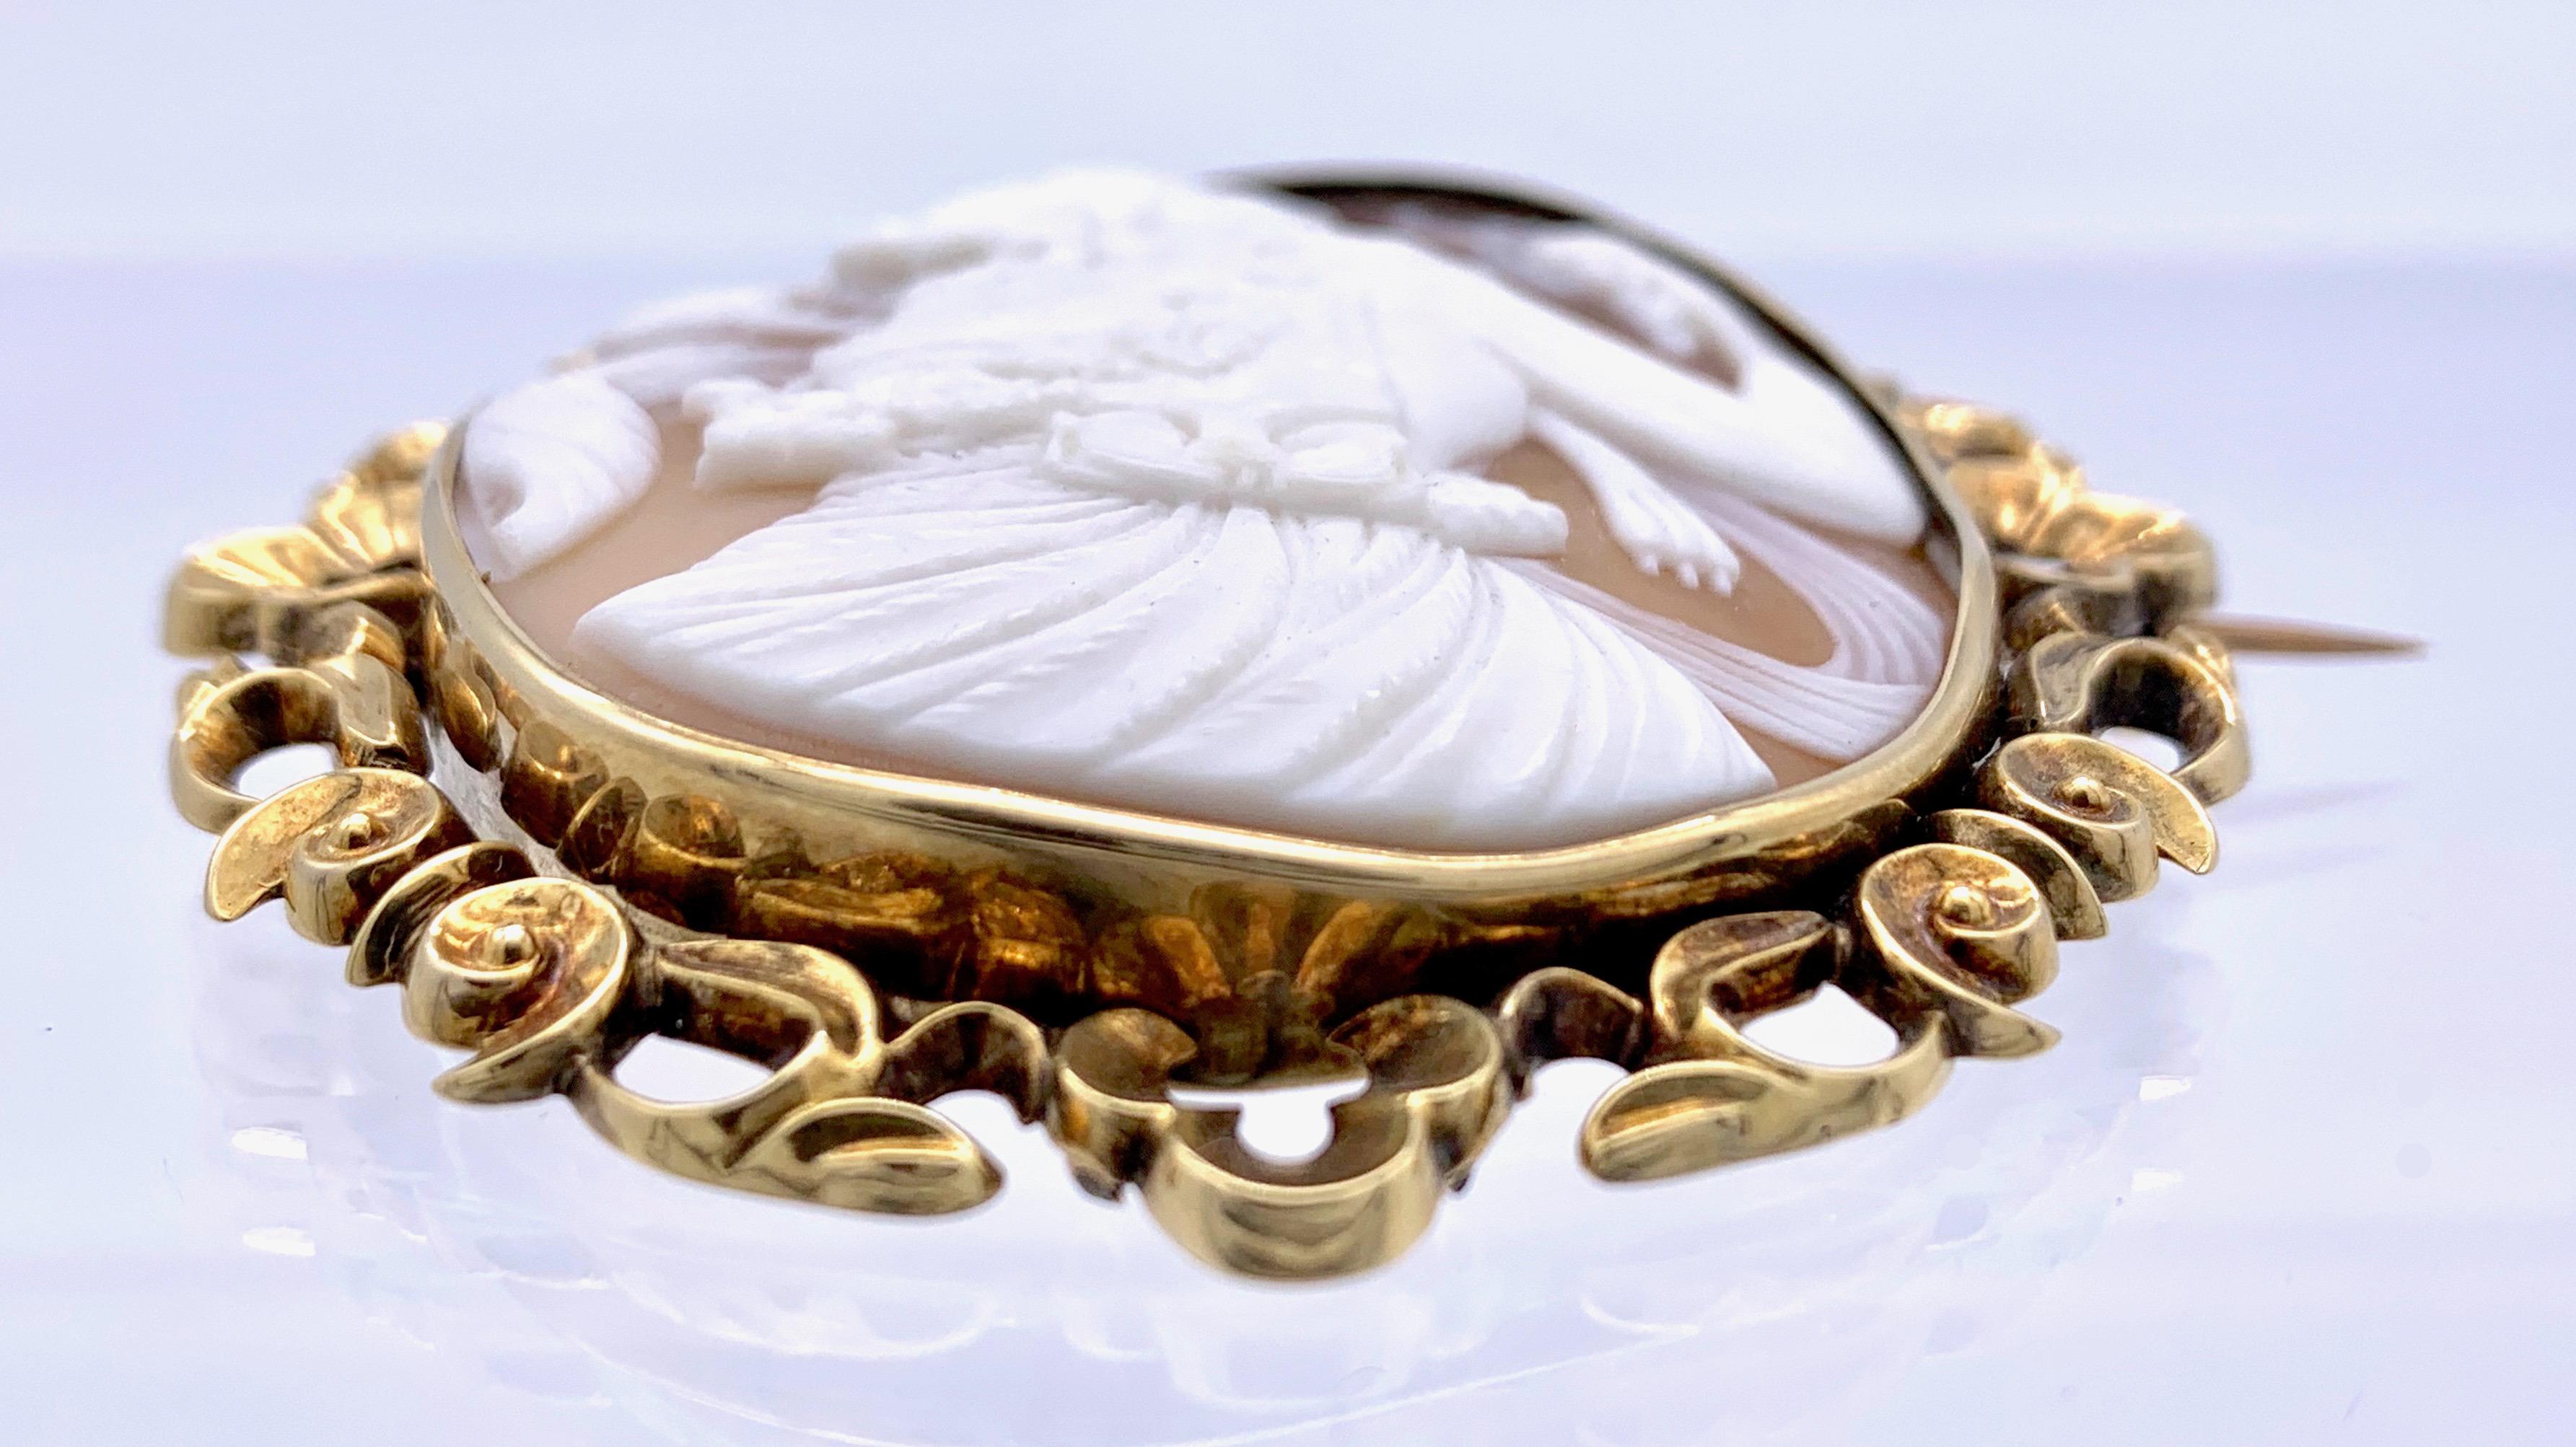 This beautiful large cameo of a bacchante is a fine example of Italian workmanship of the mid nineteenth century.
It has been mounted in an elegant victorian 9 karat gold frame